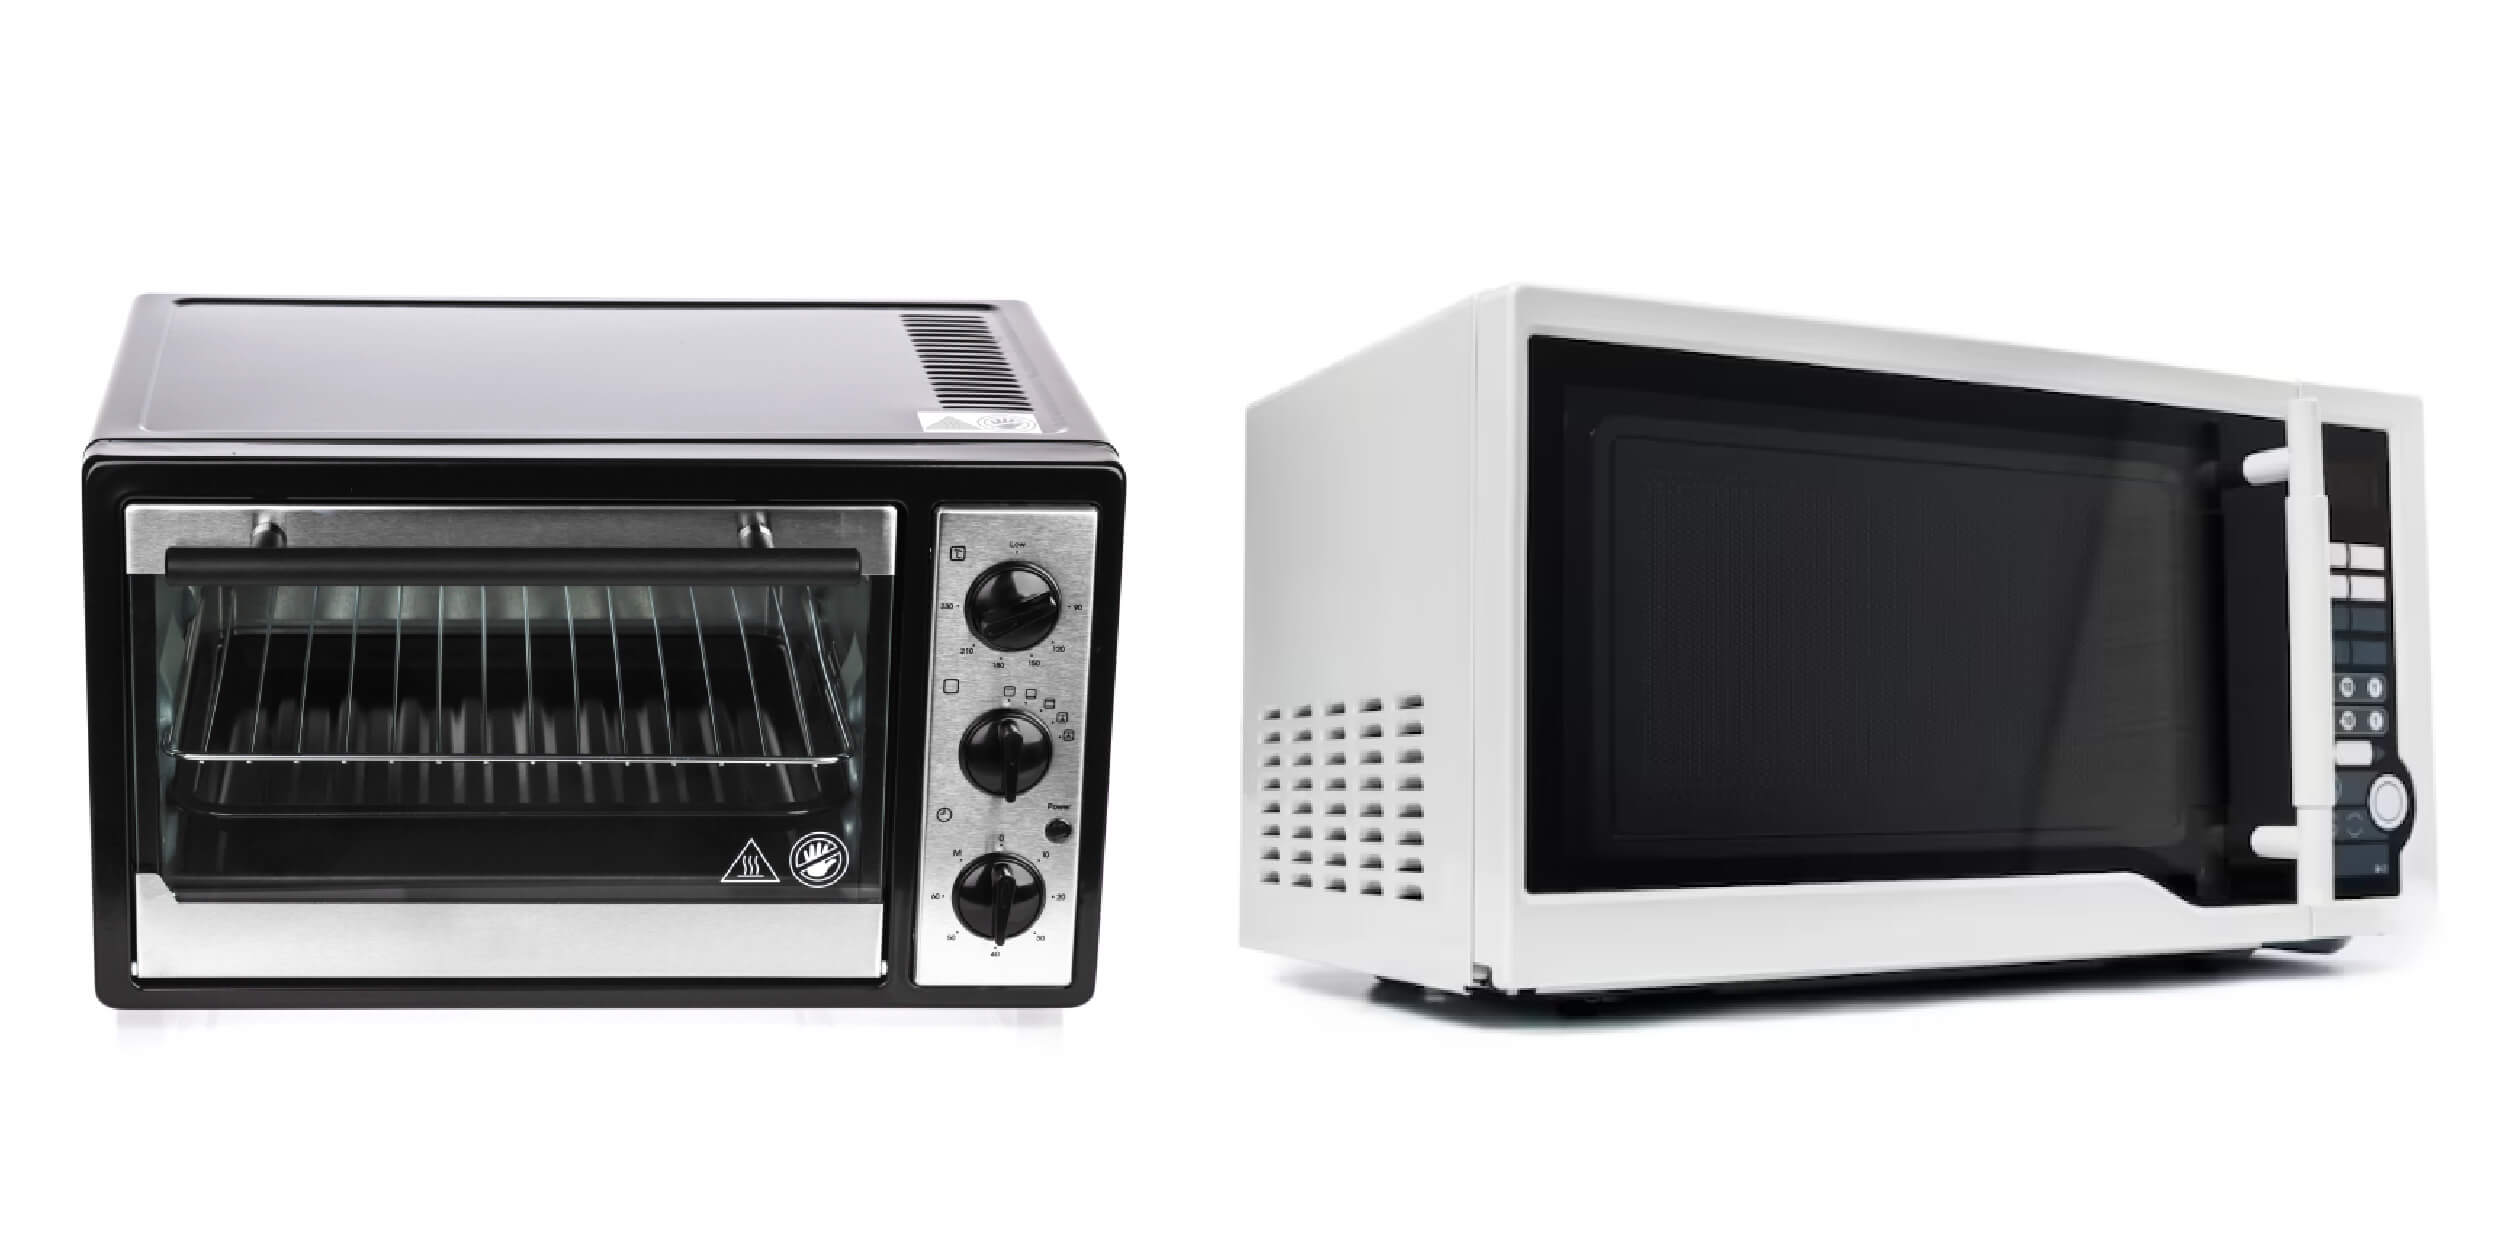 Toaster Oven vs Microwave: Choosing the Best Kitchen Appliance